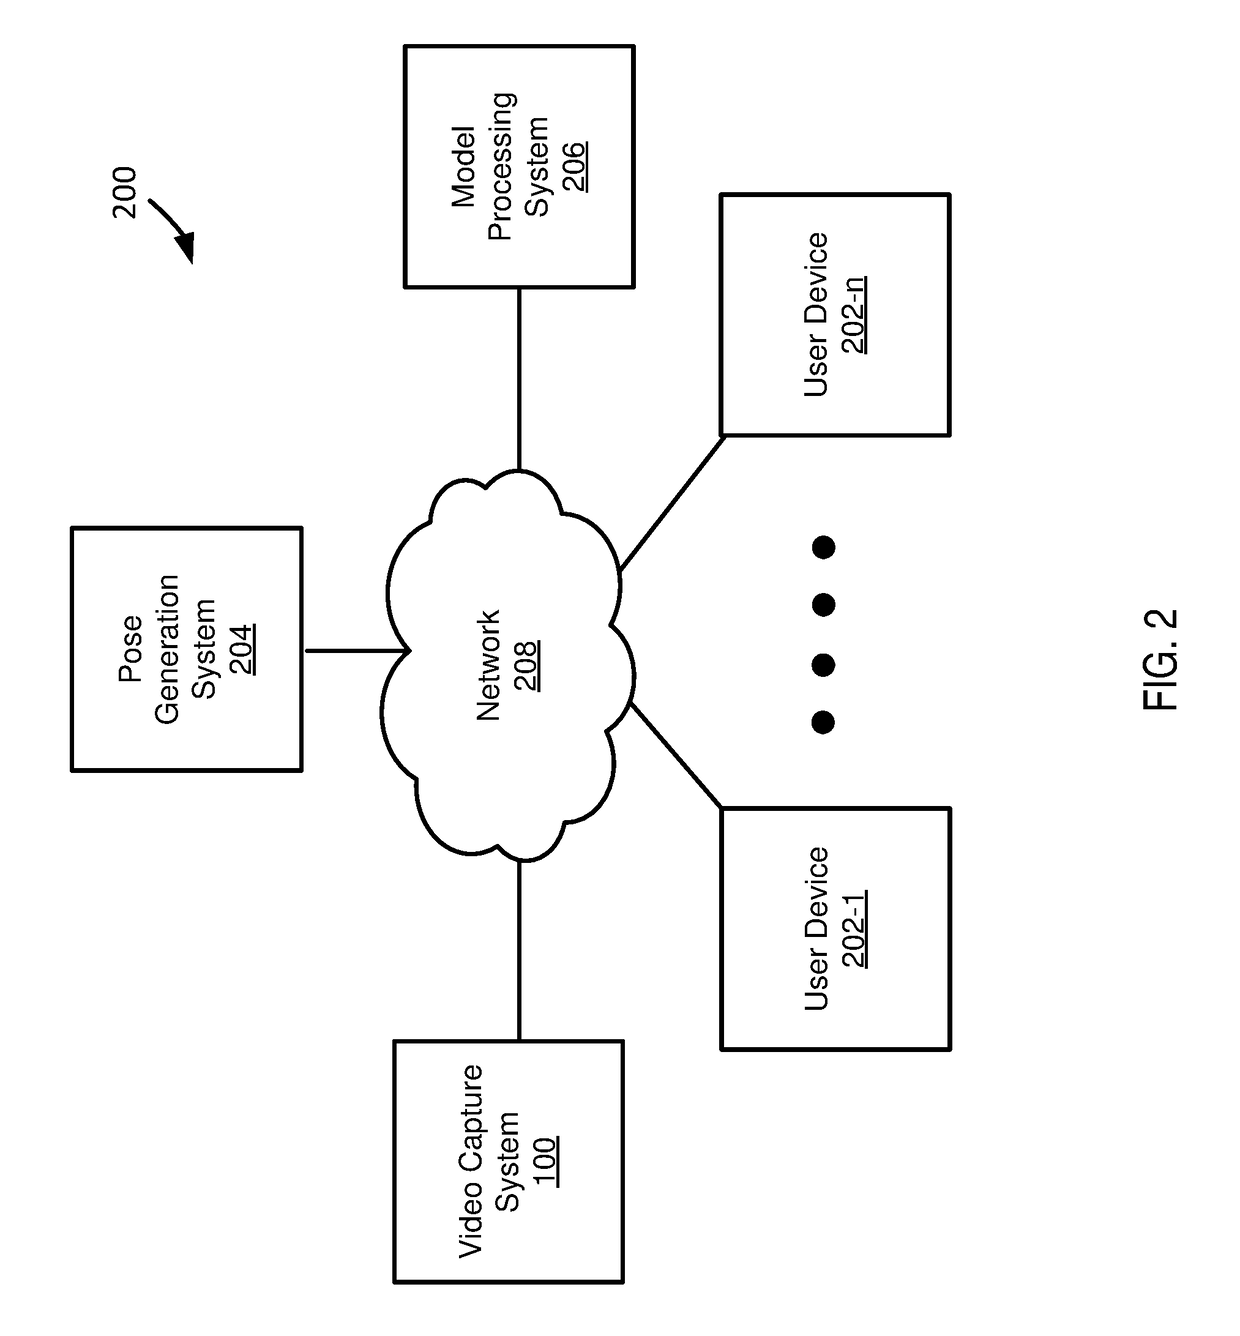 Systems and methods for capturing participant likeness for a video game character